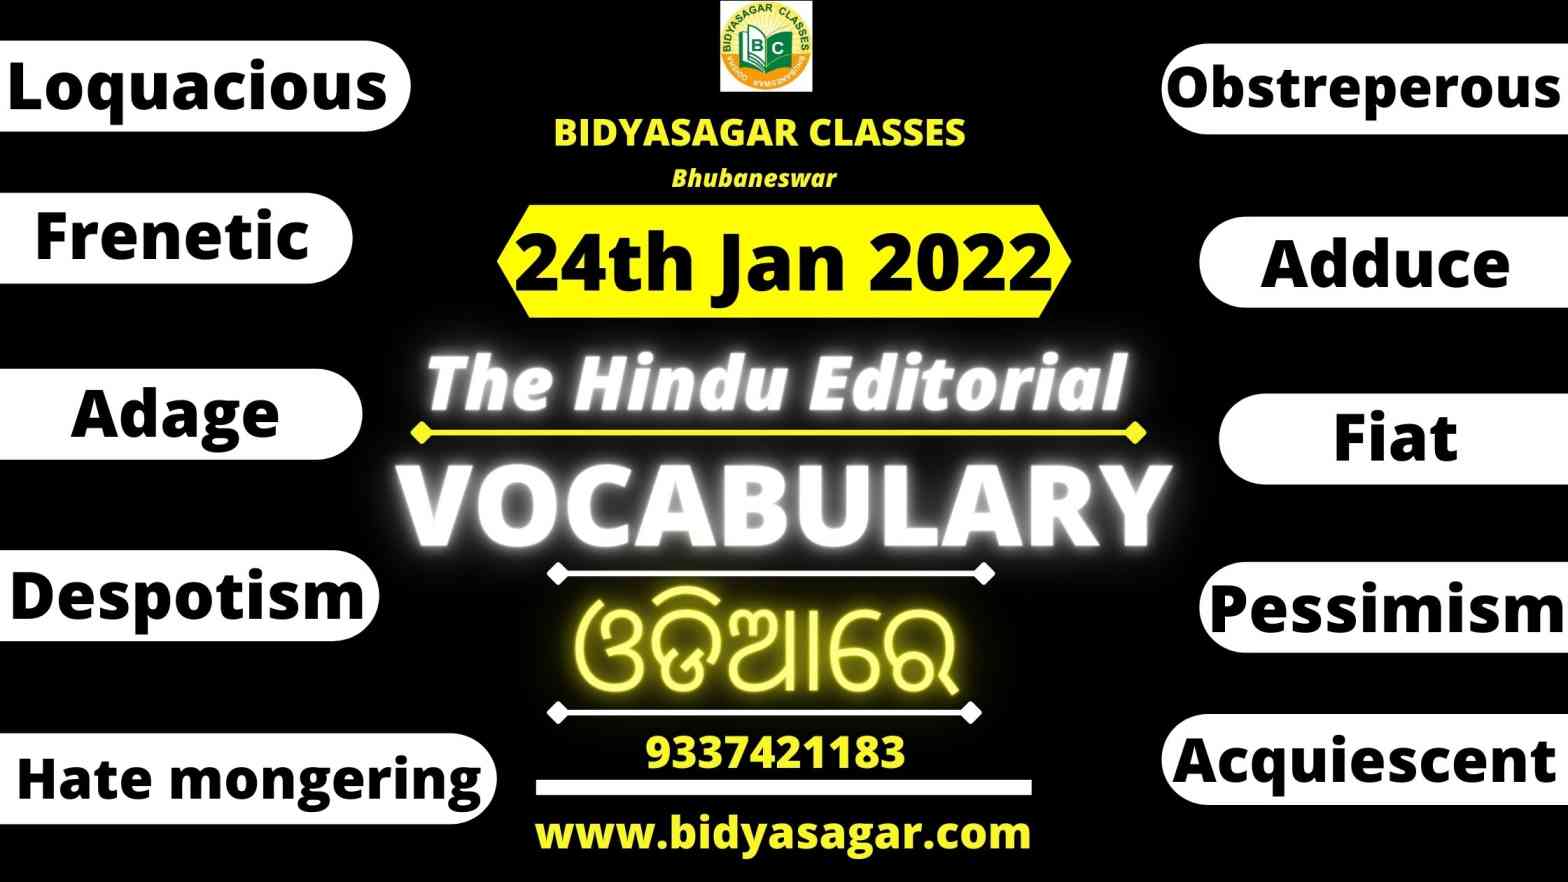 The Hindu Editorial Vocabulary of 24th January 2022